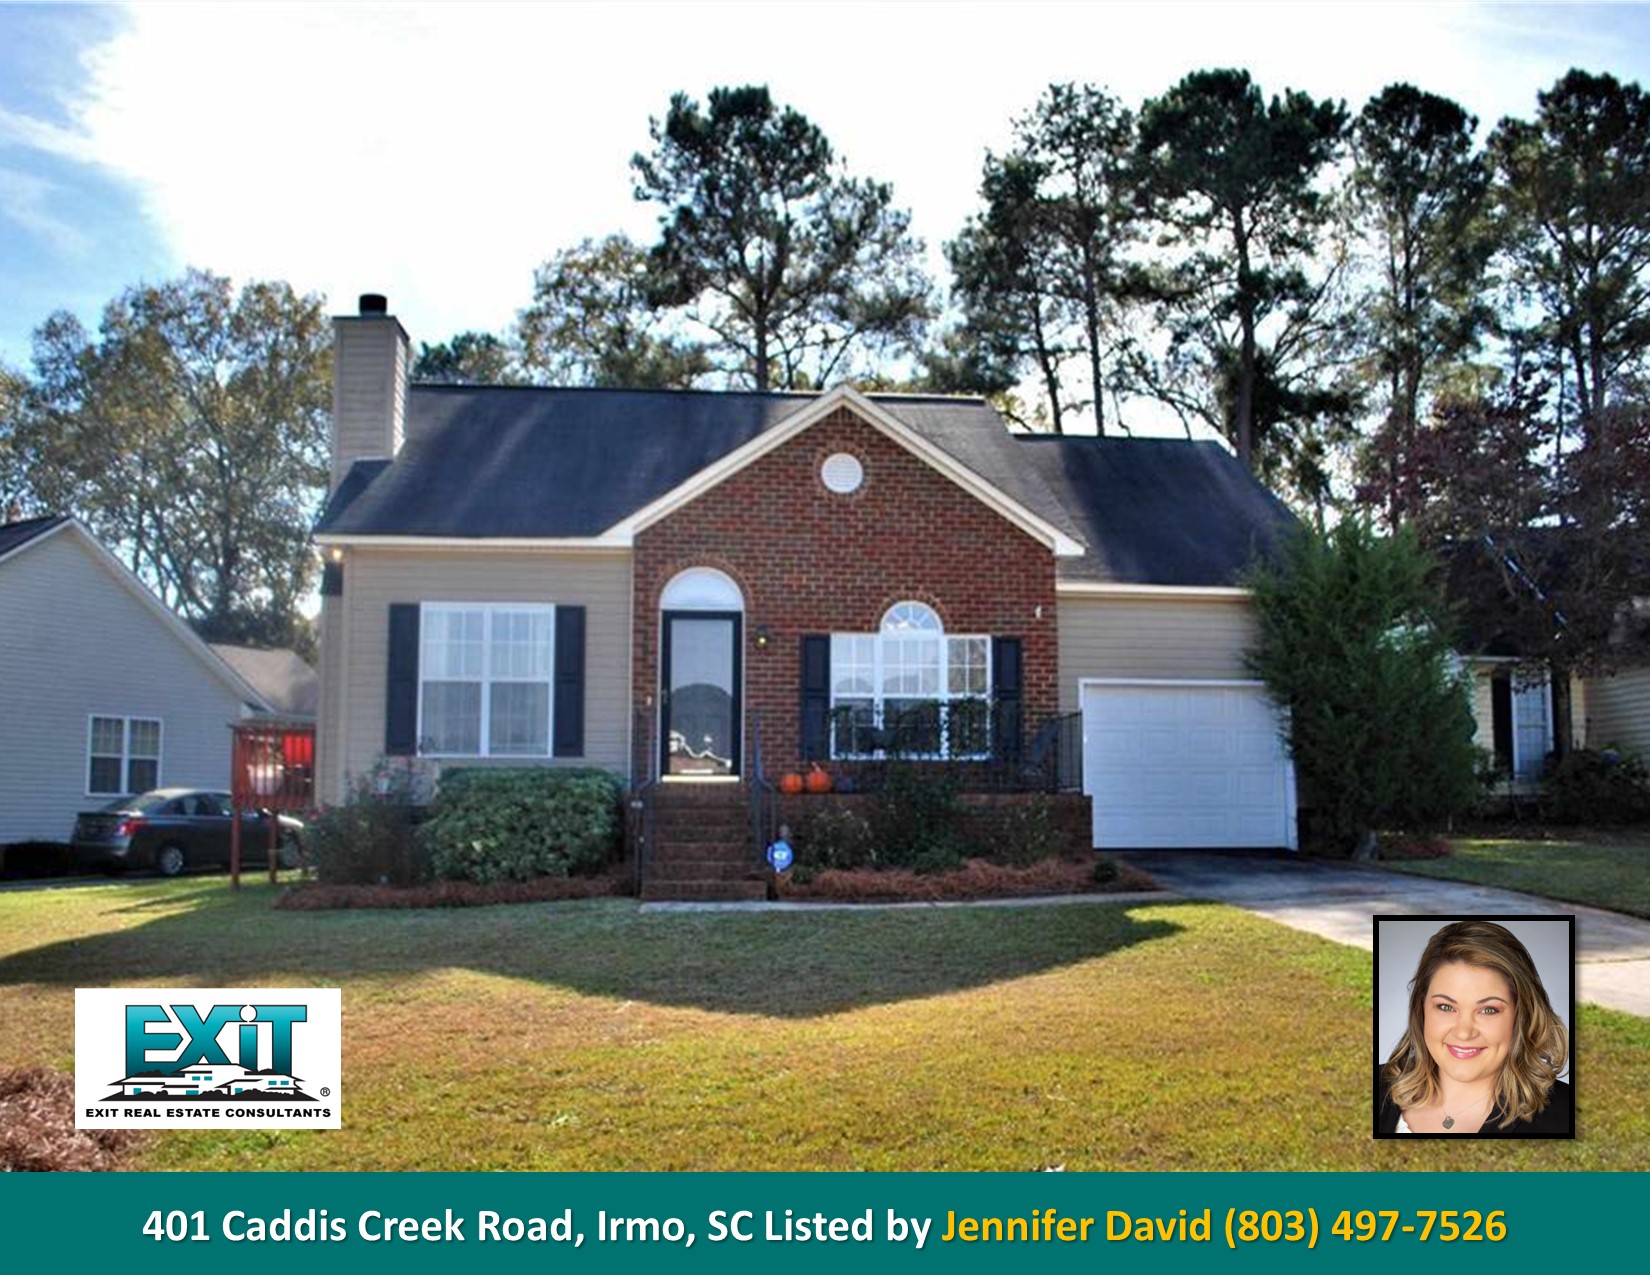 New listing in Winrose - Irmo